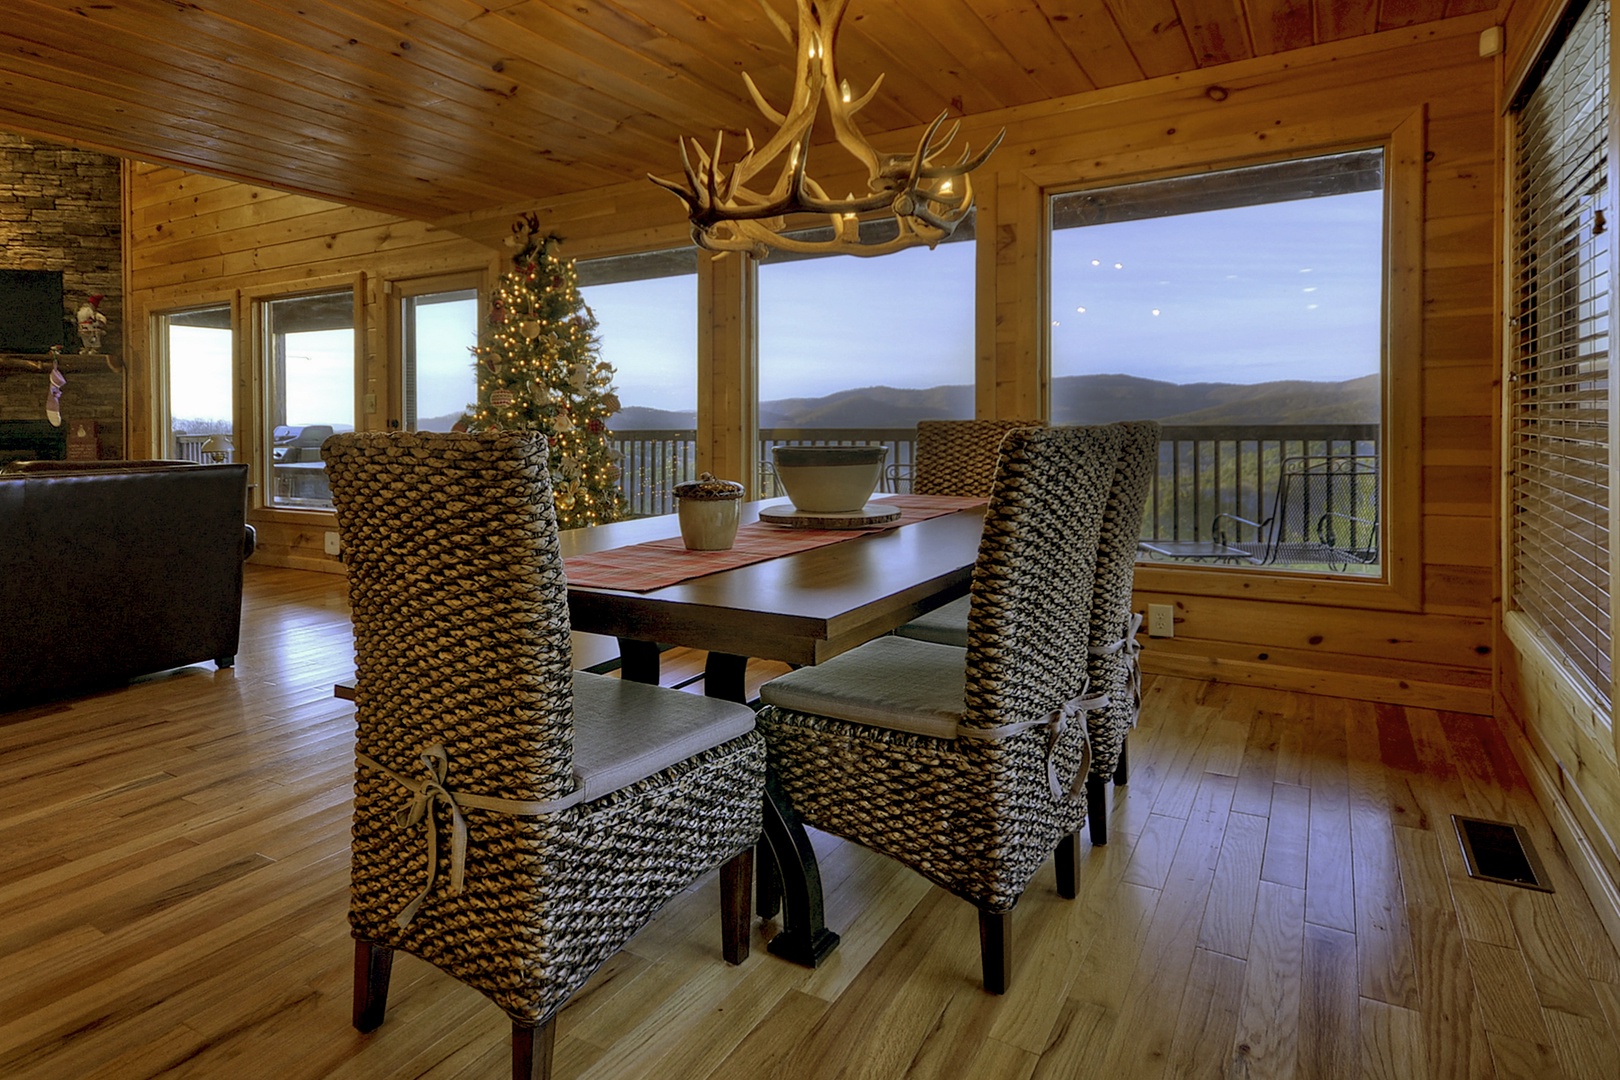 Bearcat Lodge- Dining room area with seating for 6